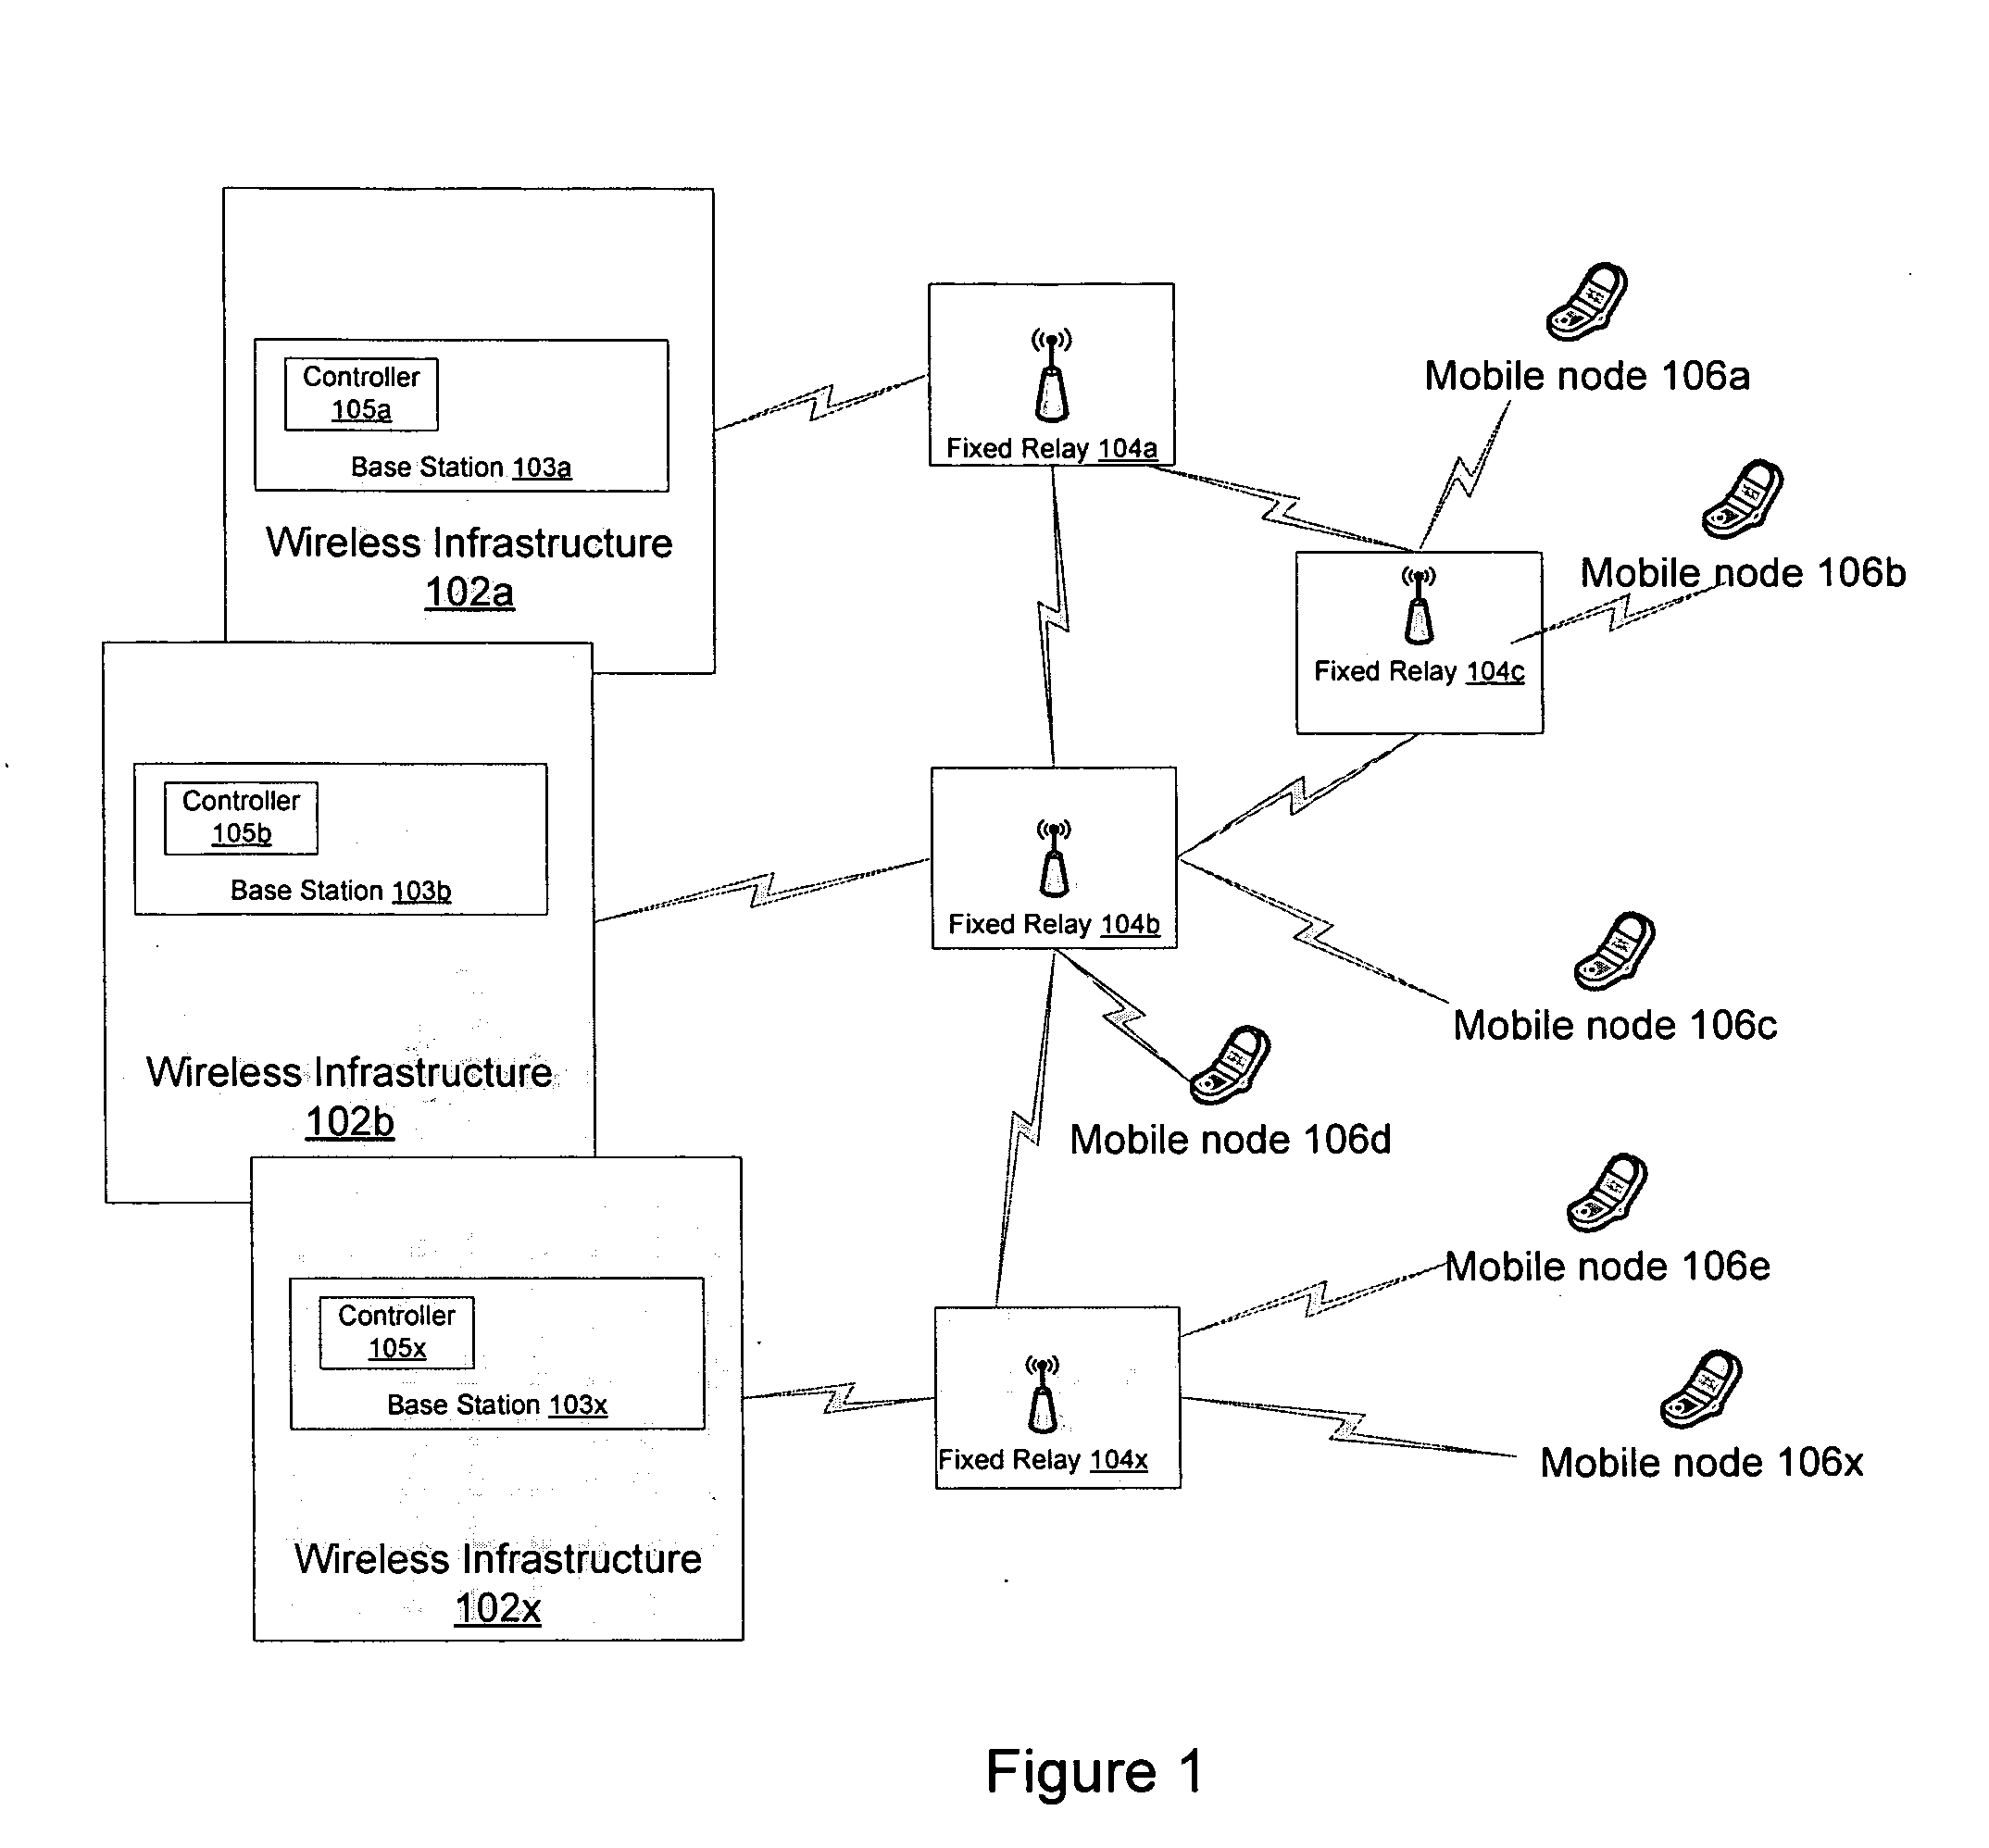 Method and apparatus for scale-free topology generation in relay based wireless networks